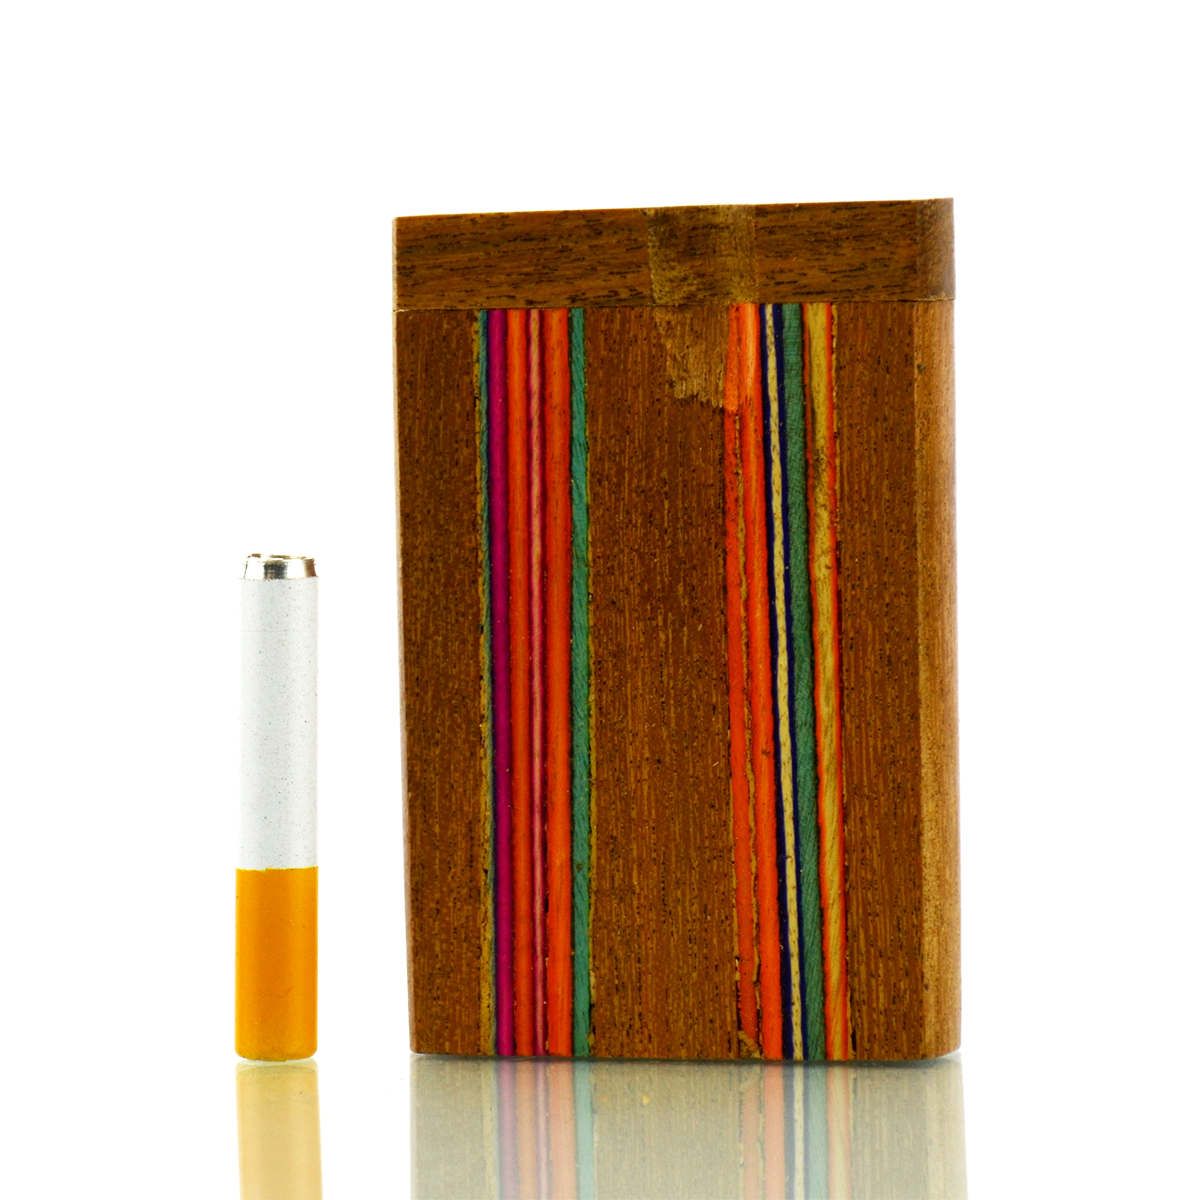 3" Handmade Wooden Double Colors Lines Design Dugout Art with 2" Metal Cigarette